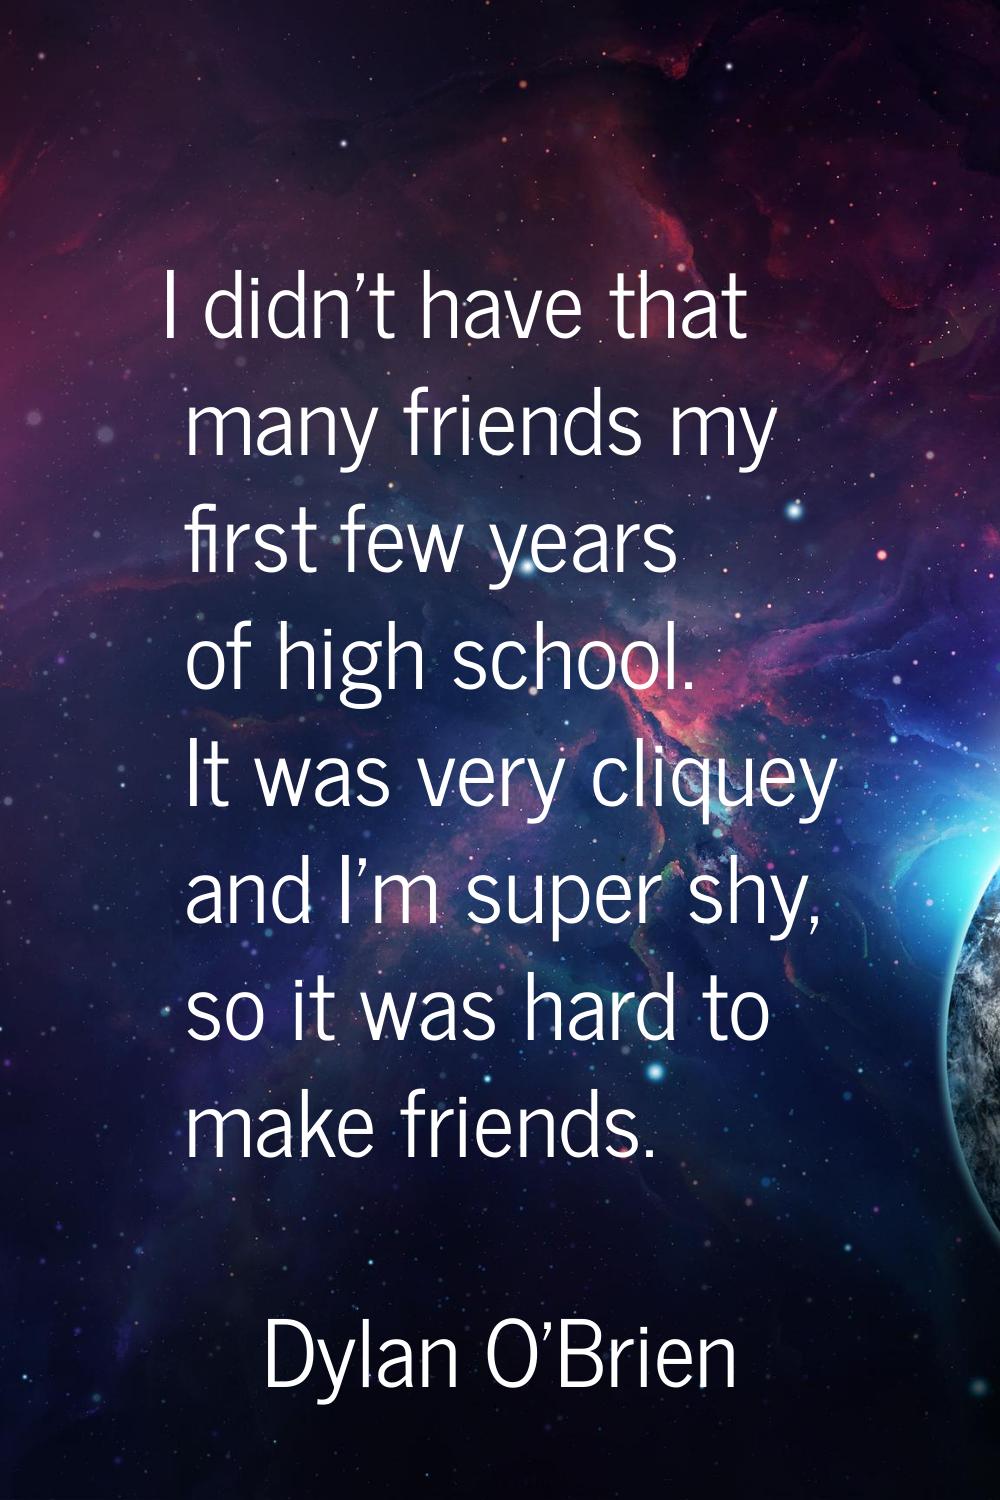 I didn't have that many friends my first few years of high school. It was very cliquey and I'm supe